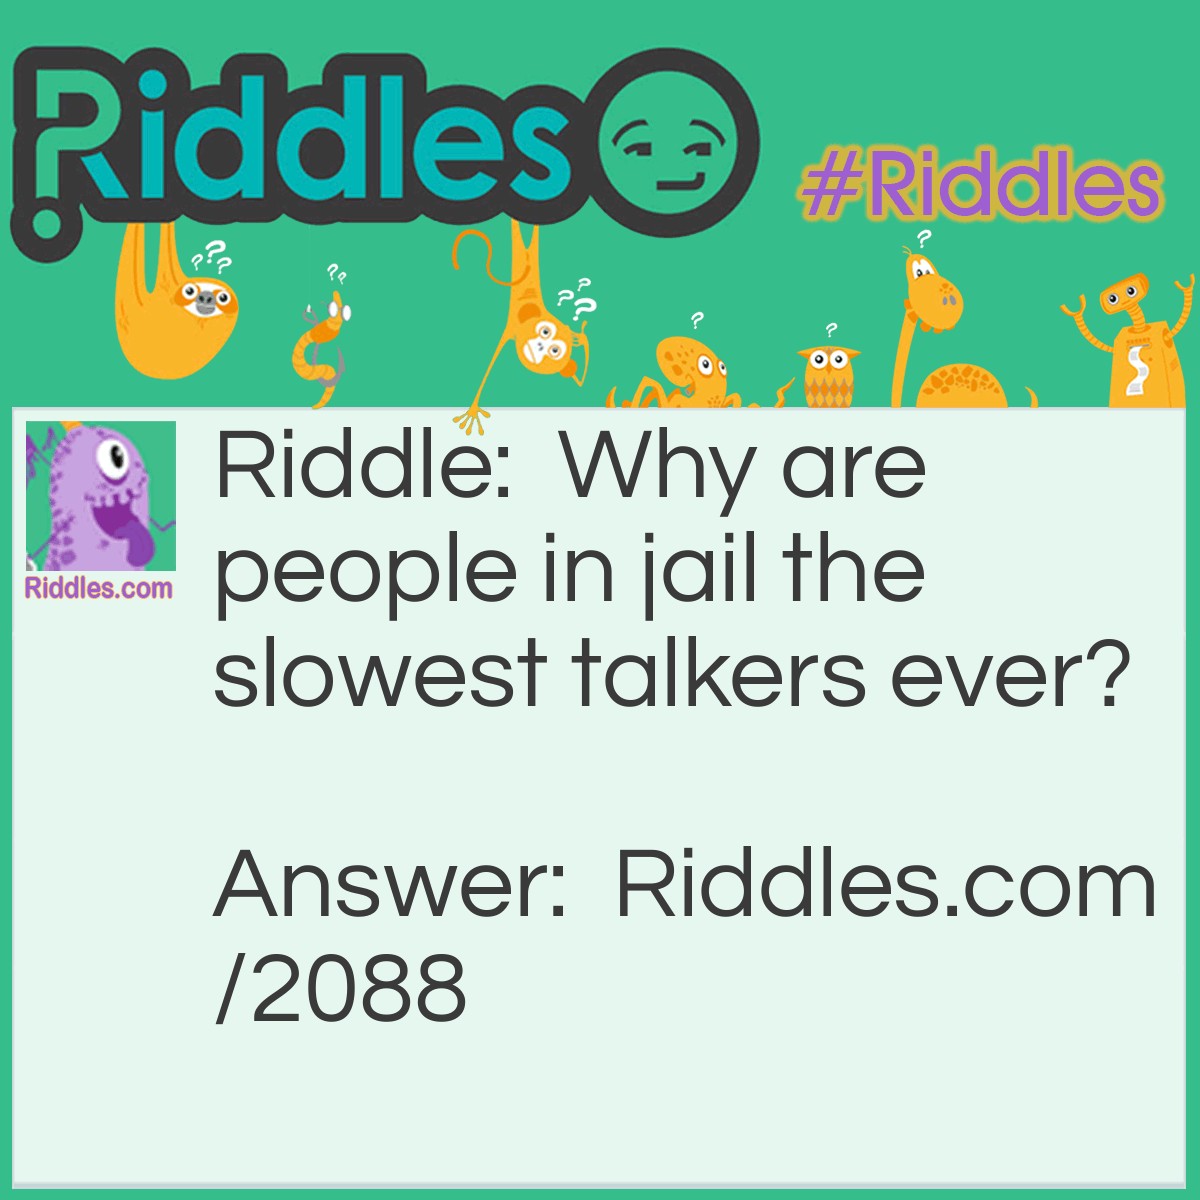 Riddle: Why are people in jail the slowest talkers ever? Answer: They can spend 25 years on a single sentence.